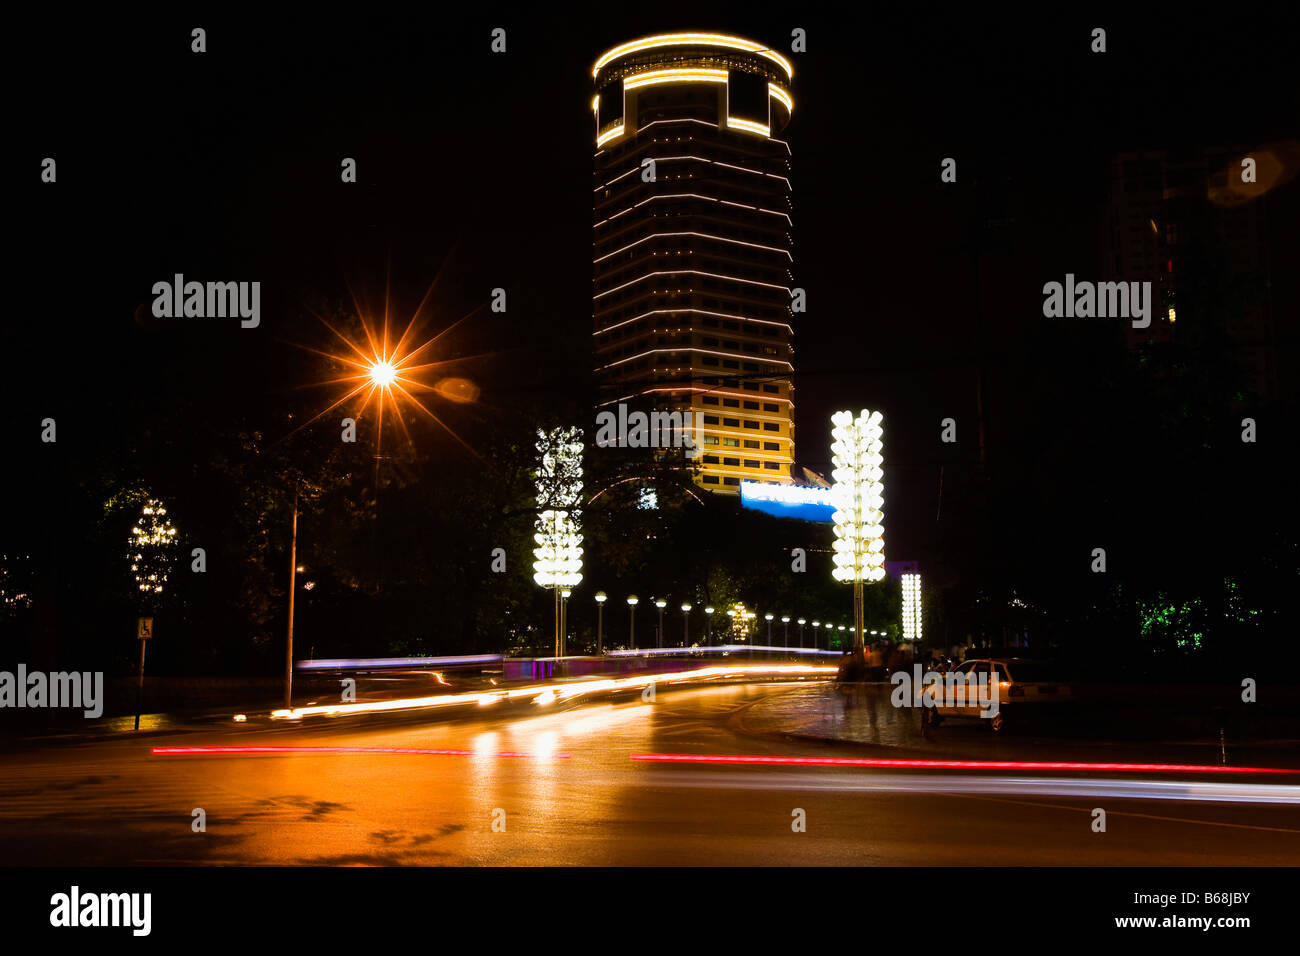 Buildings lit up at night, Hefei, Anhui Province, China Stock Photo